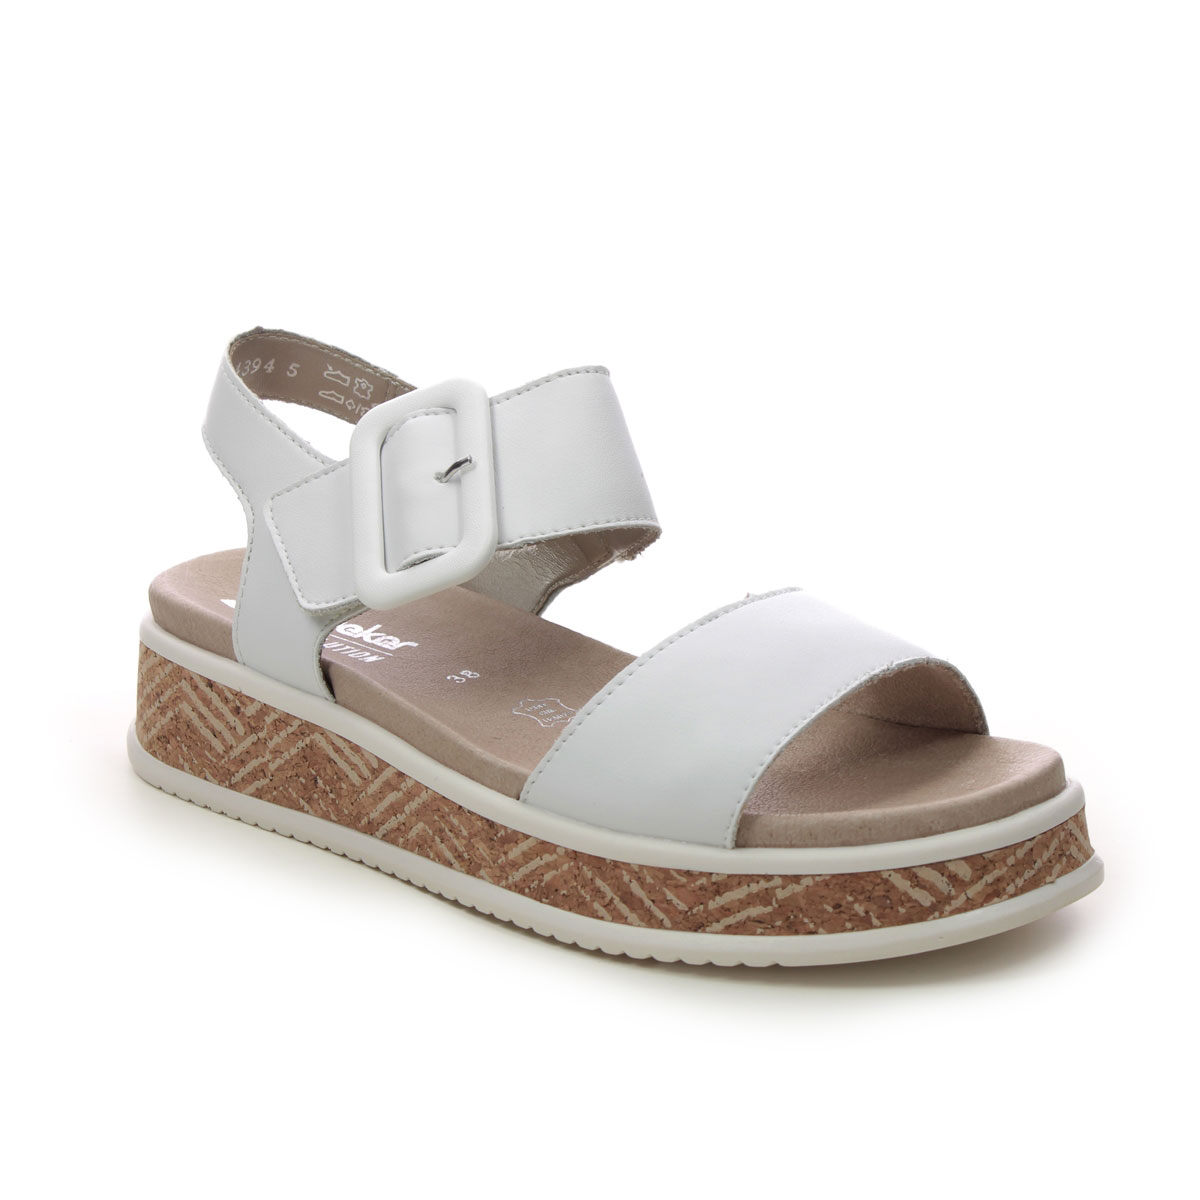 Rieker W0800-80 WHITE LEATHER Womens Flat Sandals in a Plain Leather in Size 40